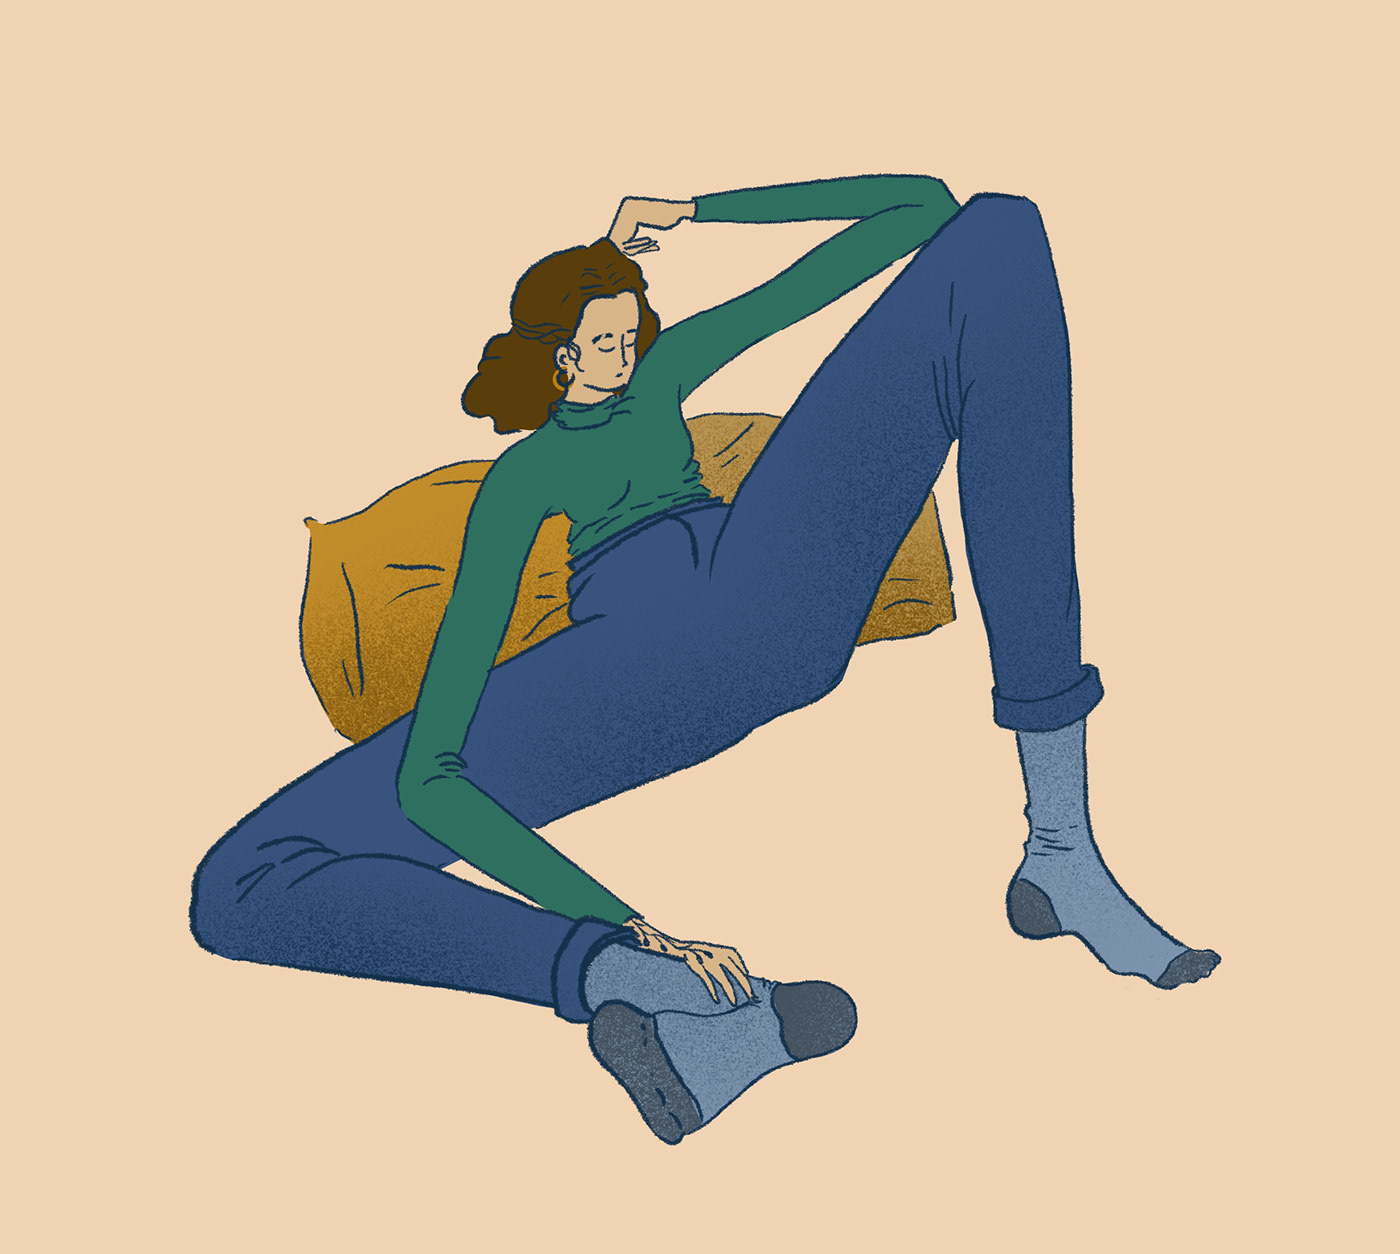 outfitoftheday ILLUSTRATION  people illustration Illustrator Magazine illustration Character design  Digital Art  female illustration OOTD outfit design